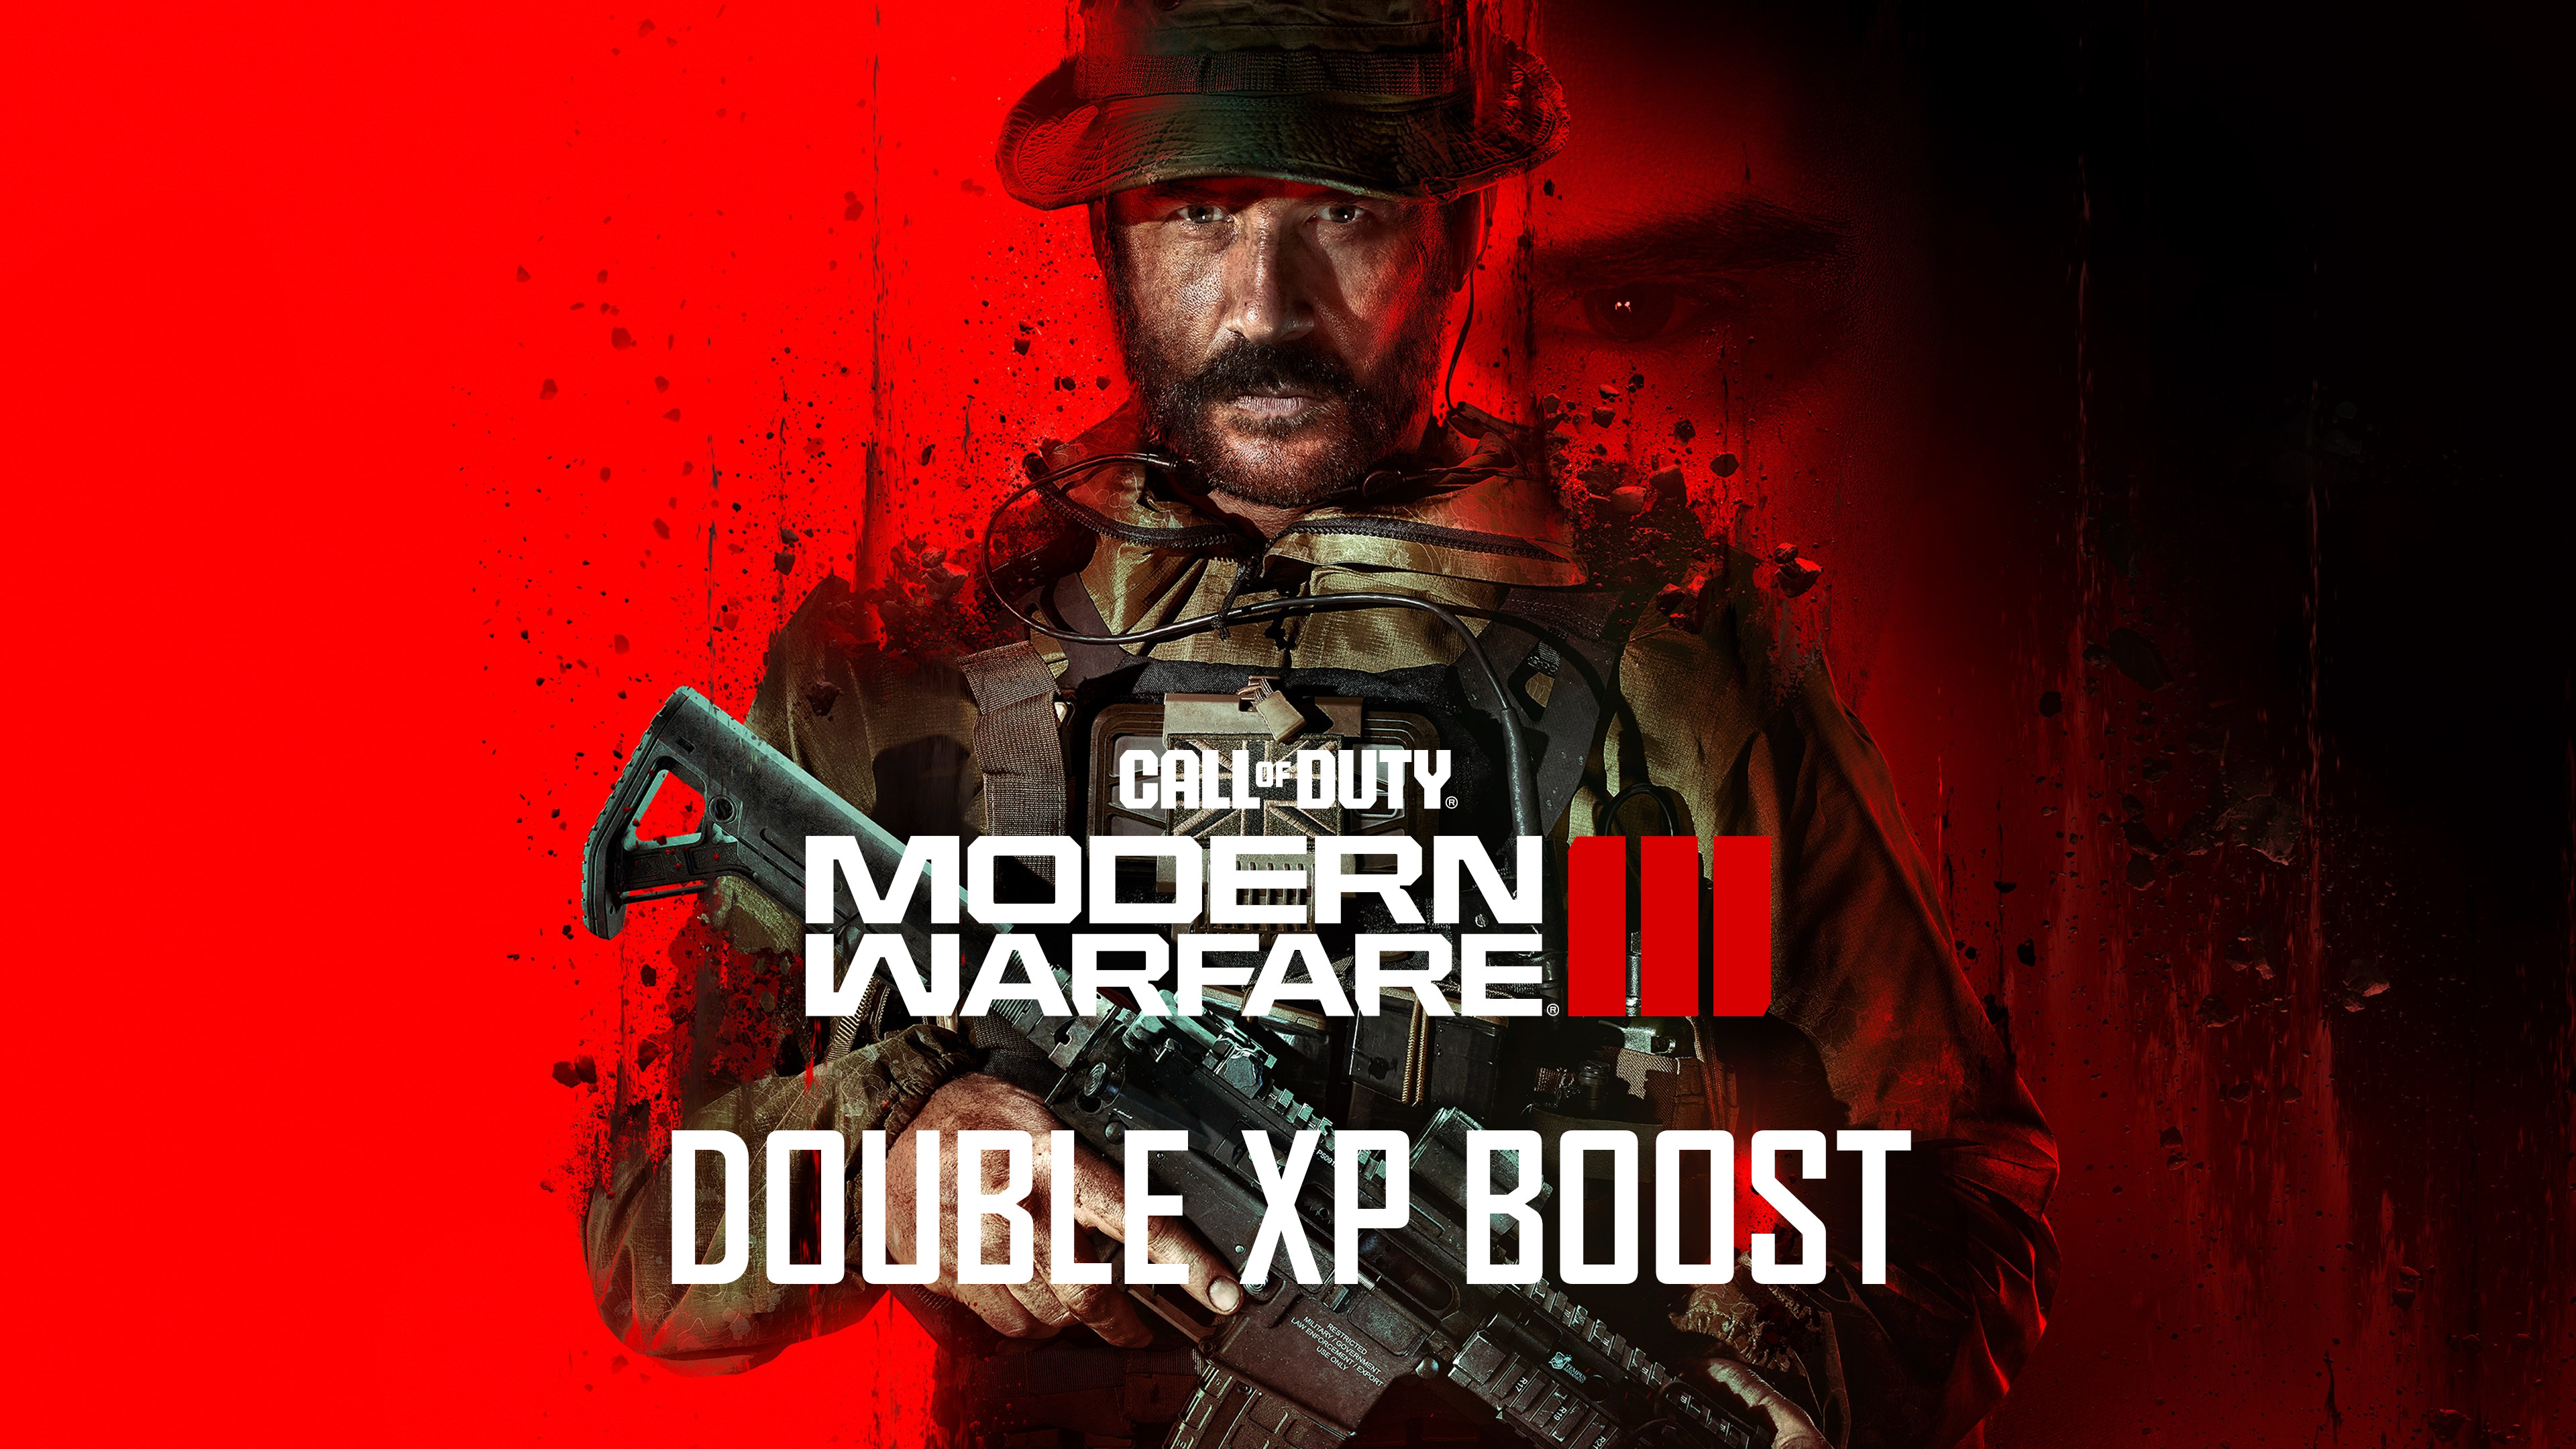 (4.52$) Call of Duty: Modern Warfare III - 5 Hours Double XP Boost PC/PS4/PS5/XBOX One/Series X|S CD Key